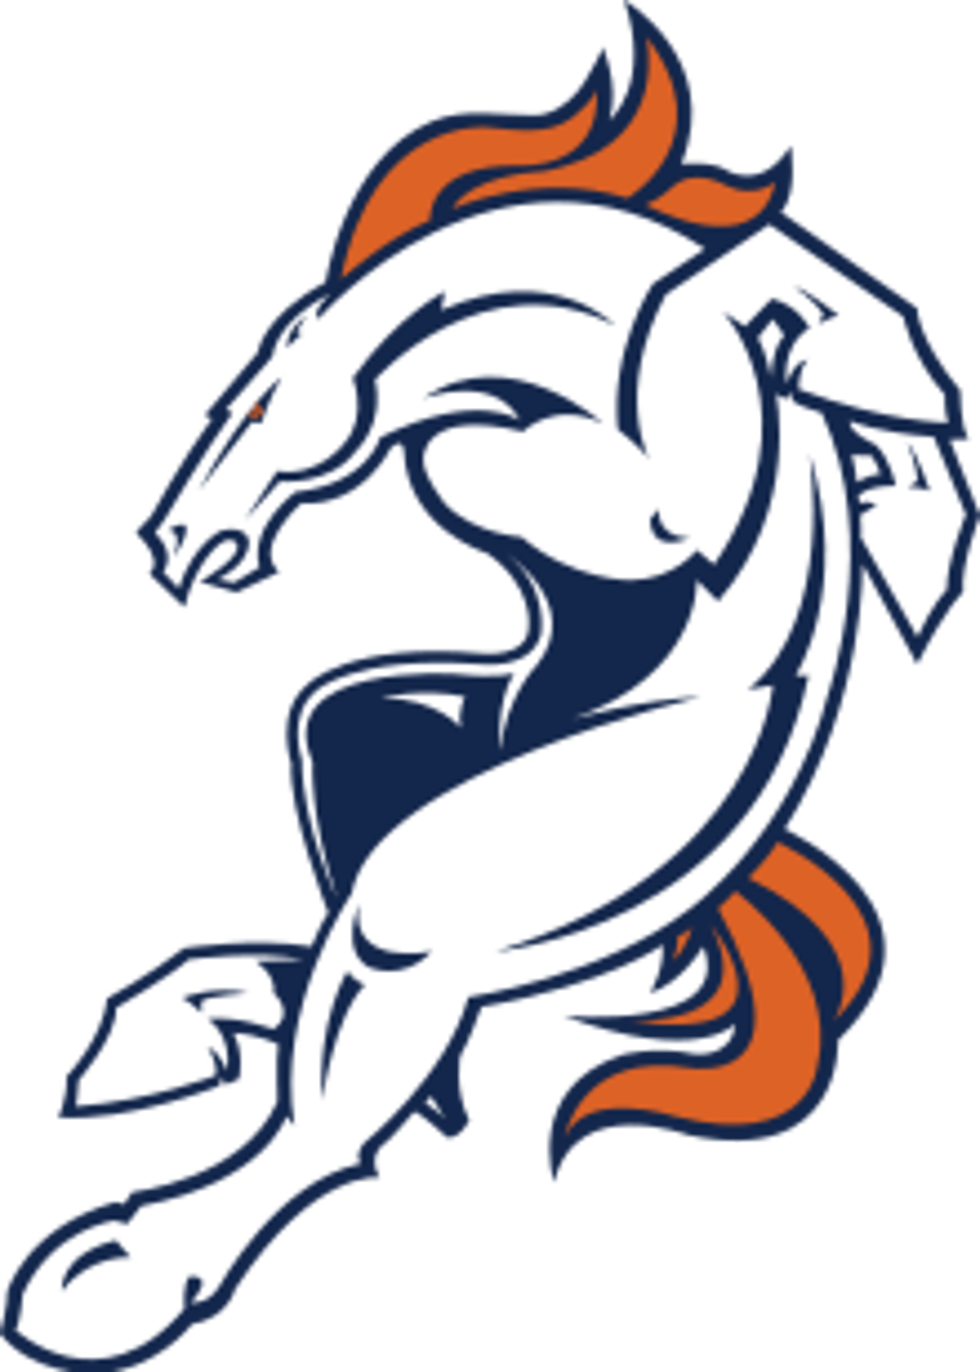 Will The Bronco’s & Tebow Make the Playoffs?